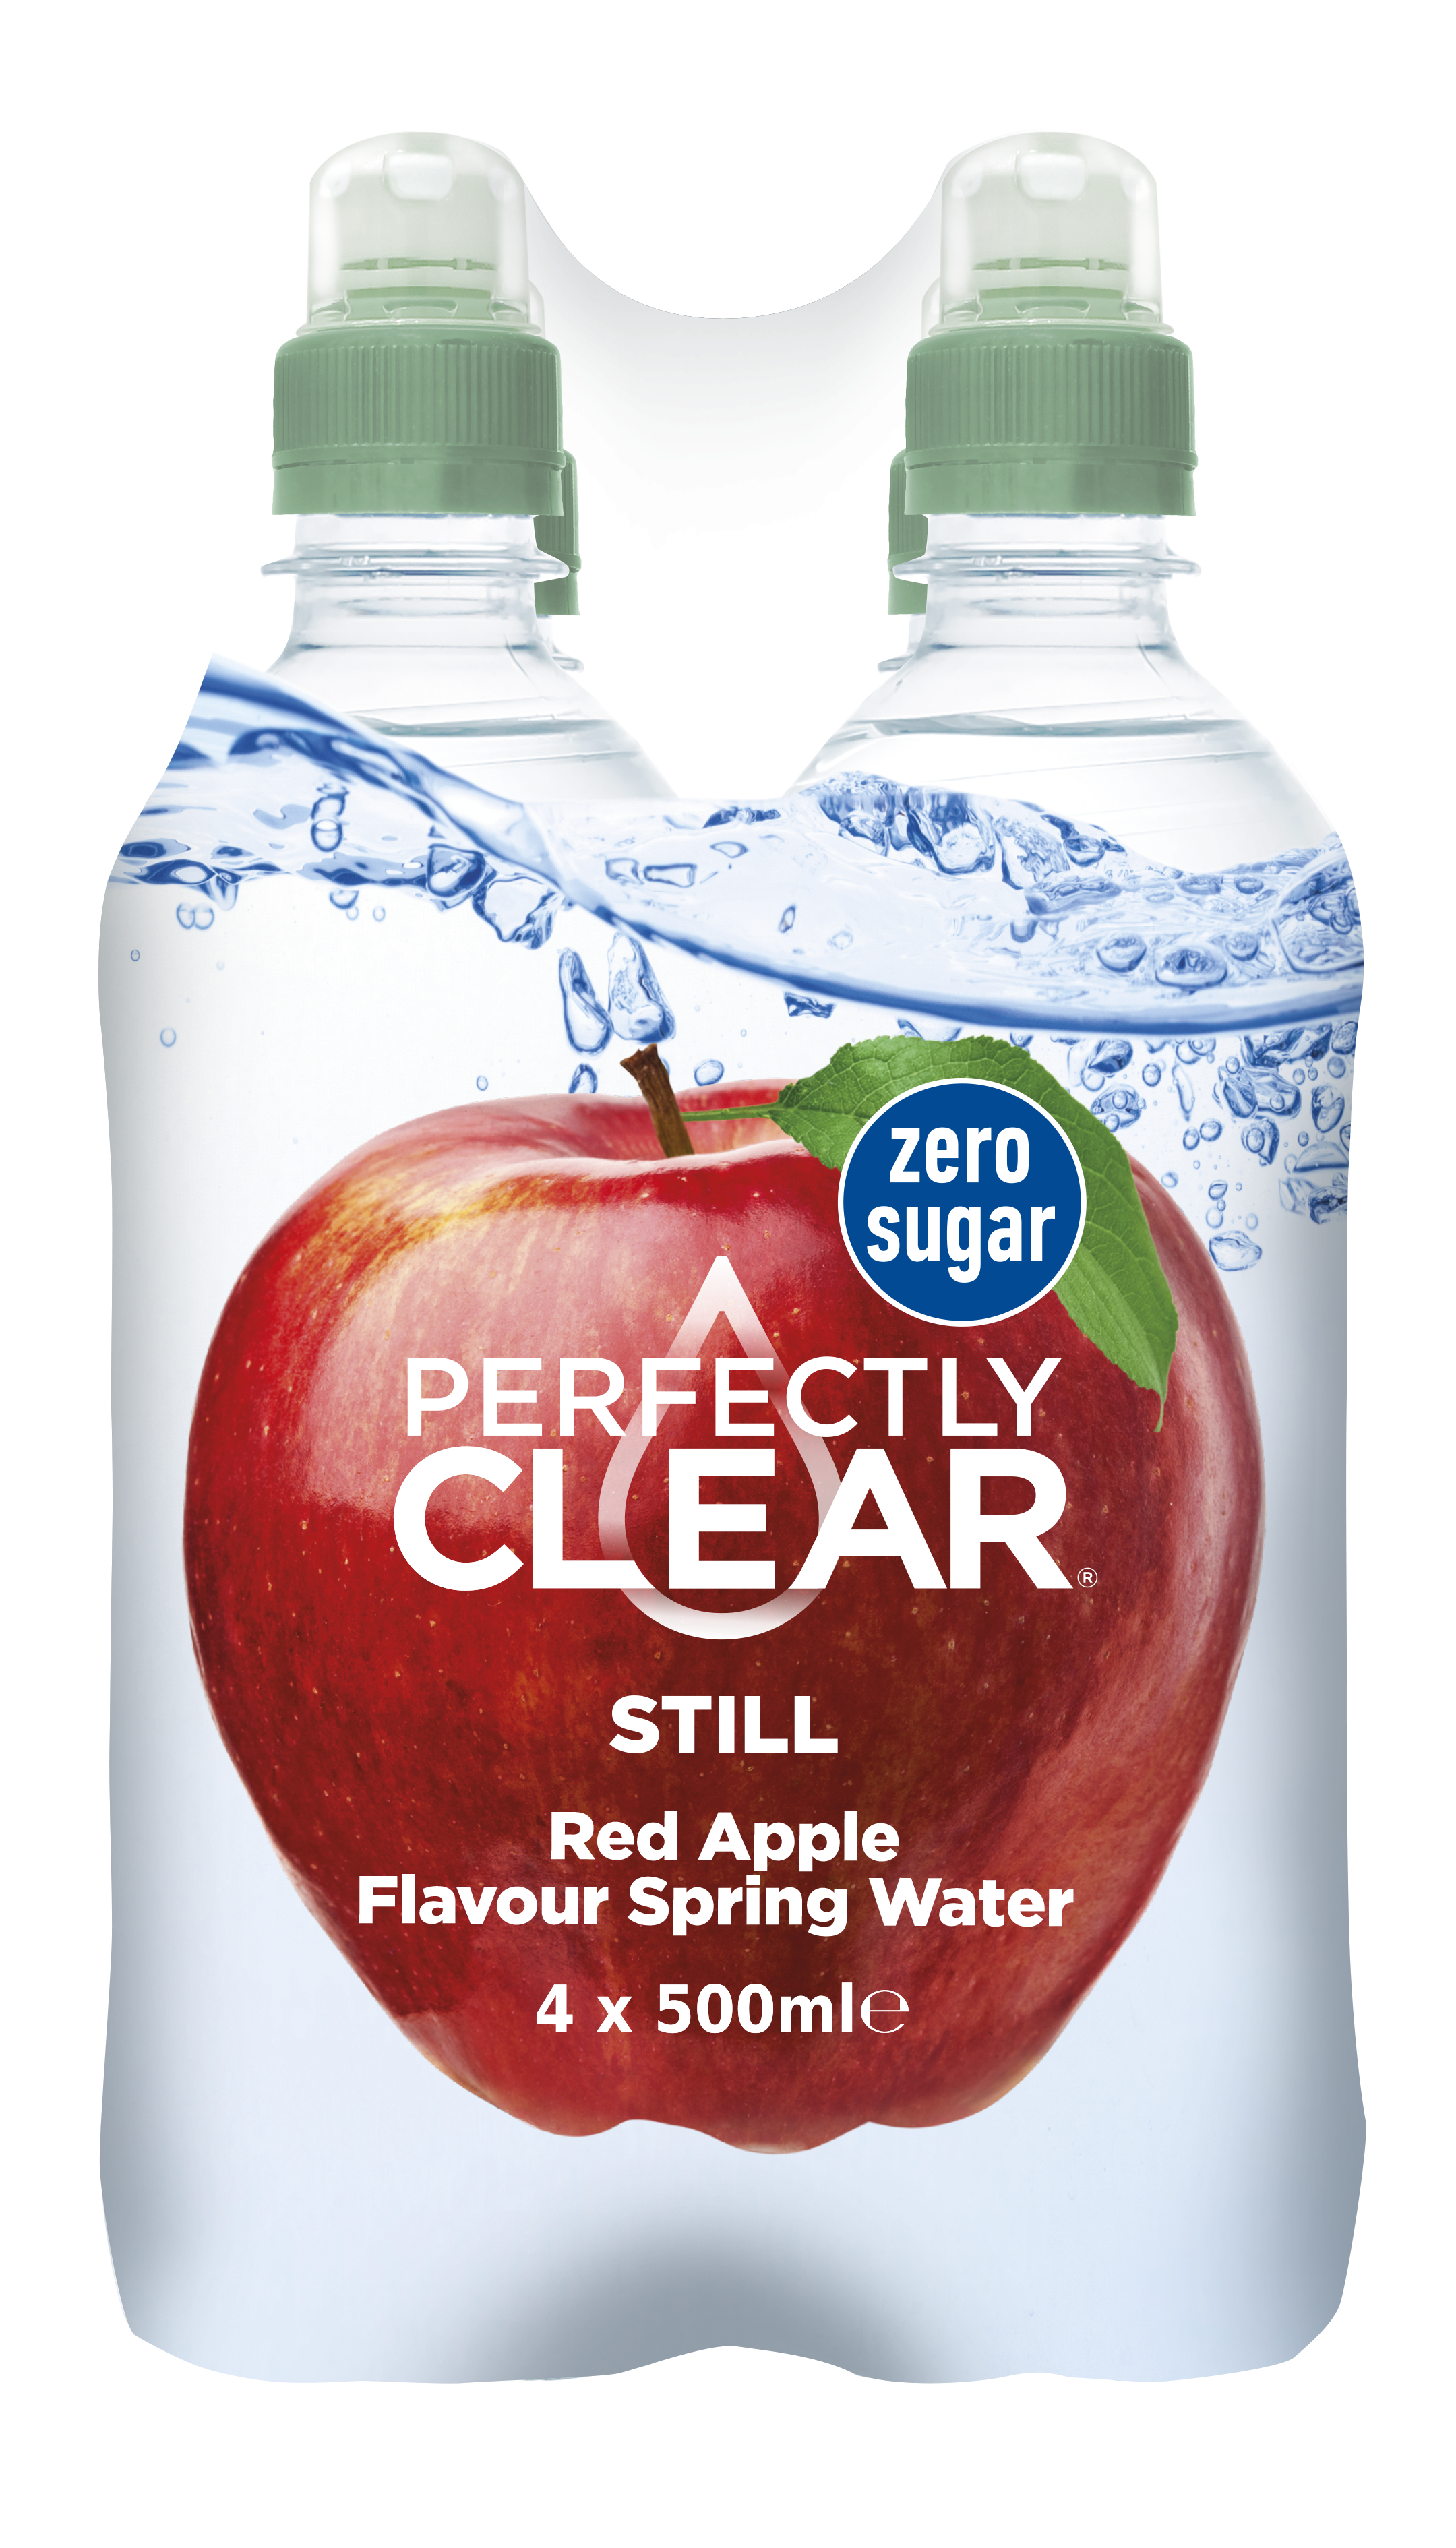 UK’s flavored water brand Perfectly Clear introduces new flavor in multipack format